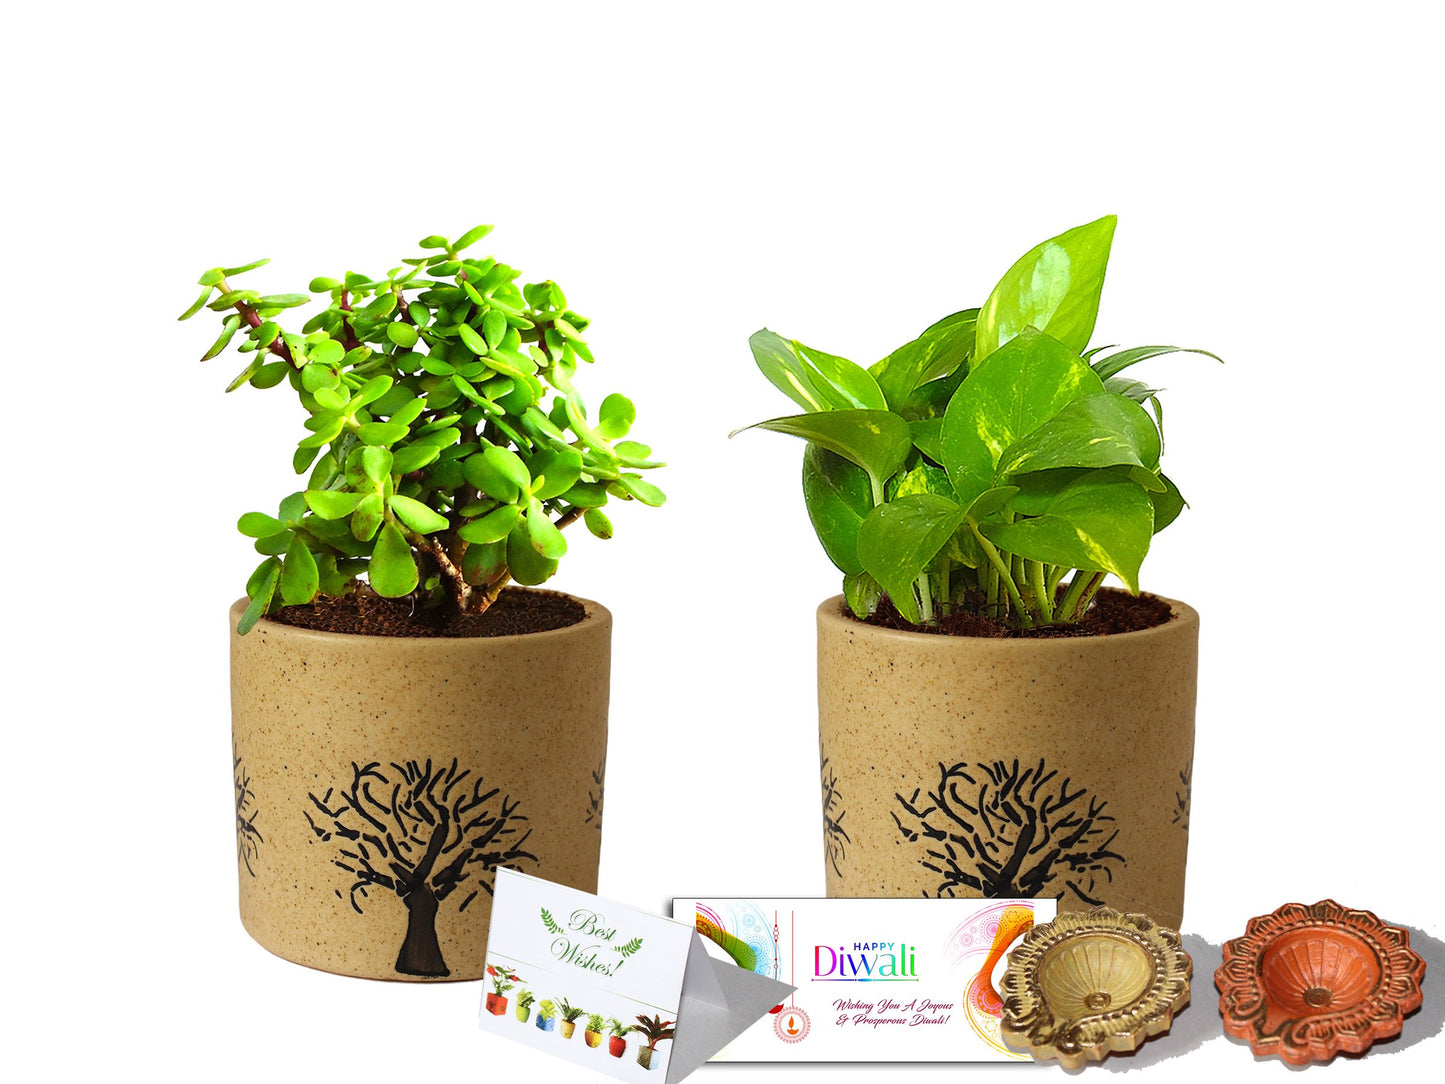 Rolling Nature Diwali Gift Combo of Good Luck Air Purifying Live Money Plant and Jade in Brown Barrel Ceramic Aroez Pot